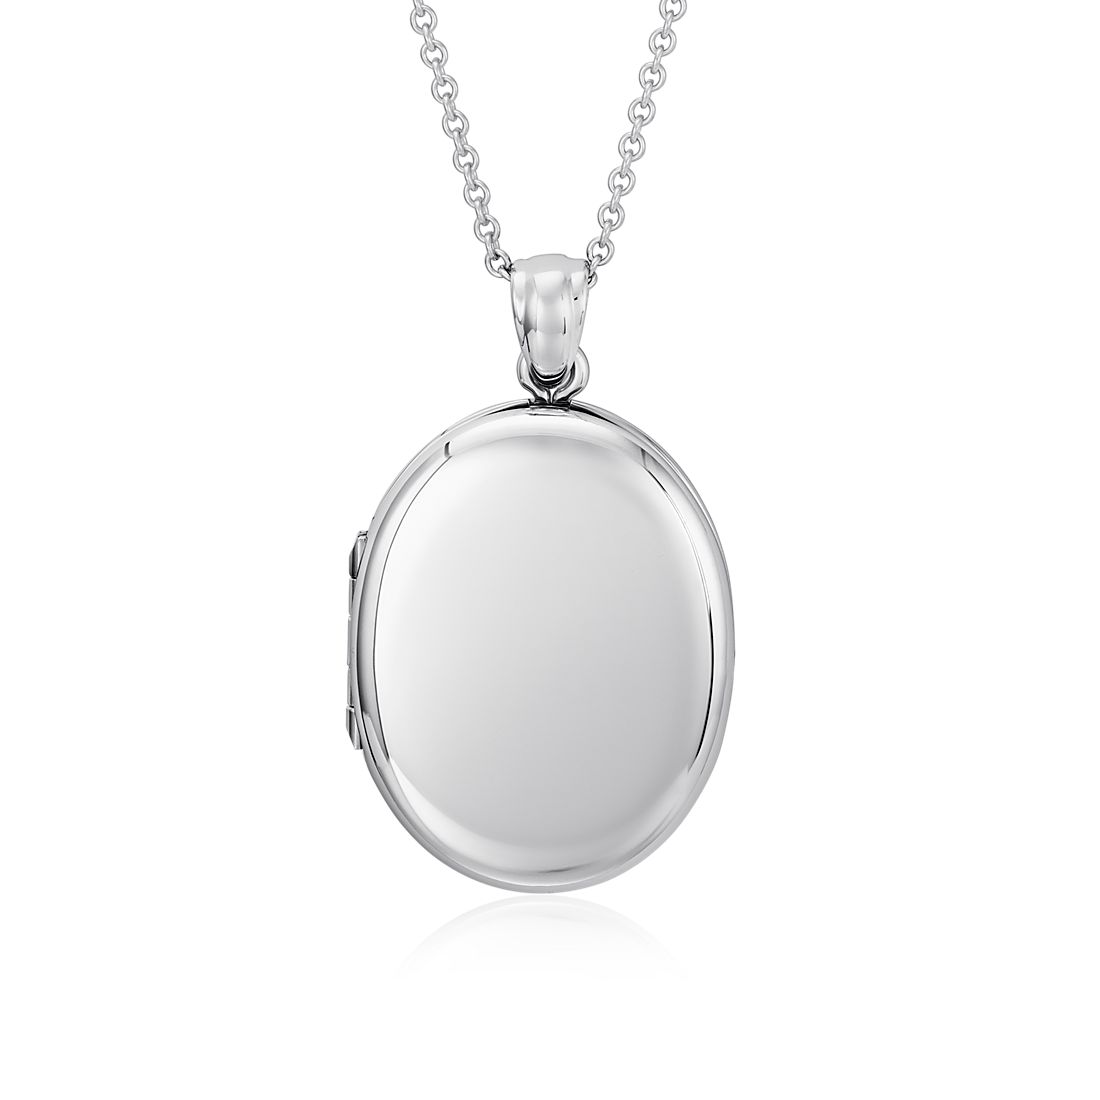 Oval Four-Picture Locket in Sterling Silver | Blue Nile